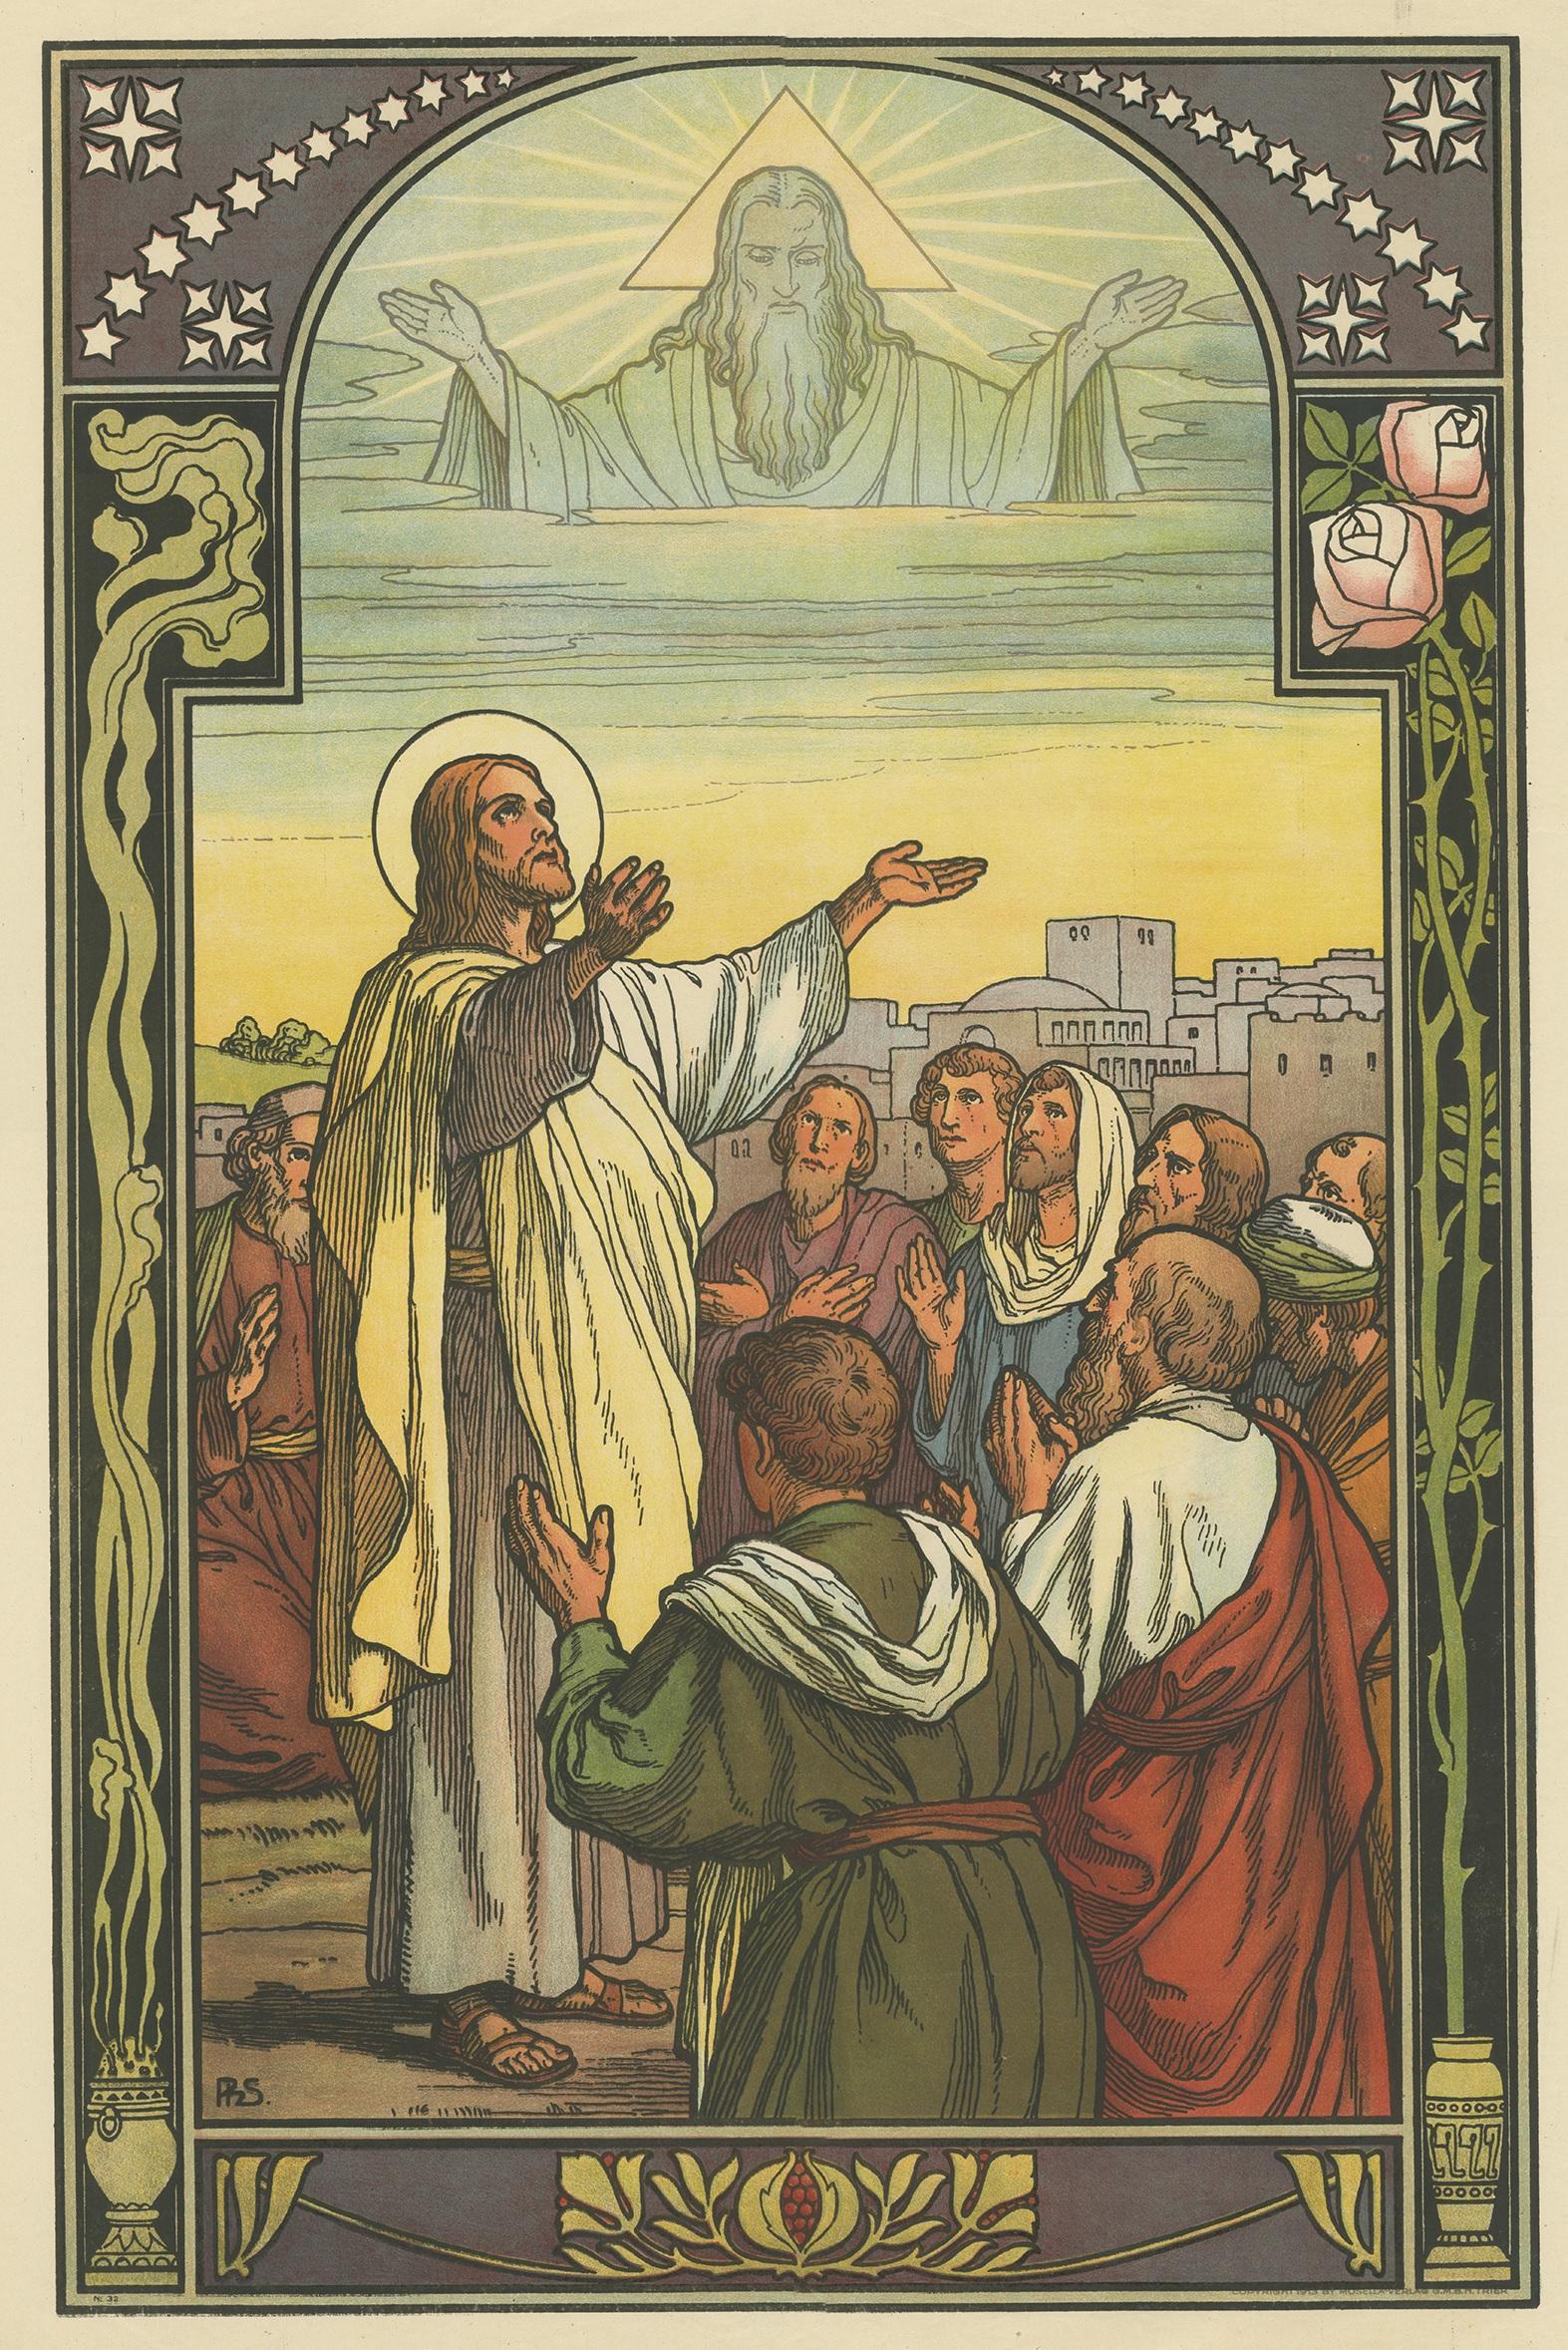 Large antique print of the Blessing of Christ. Published by Mosella-Verlag, 1913. This print originates from a series titled 'Kathol. Schulbibelwerk von Dr. Ecker'.